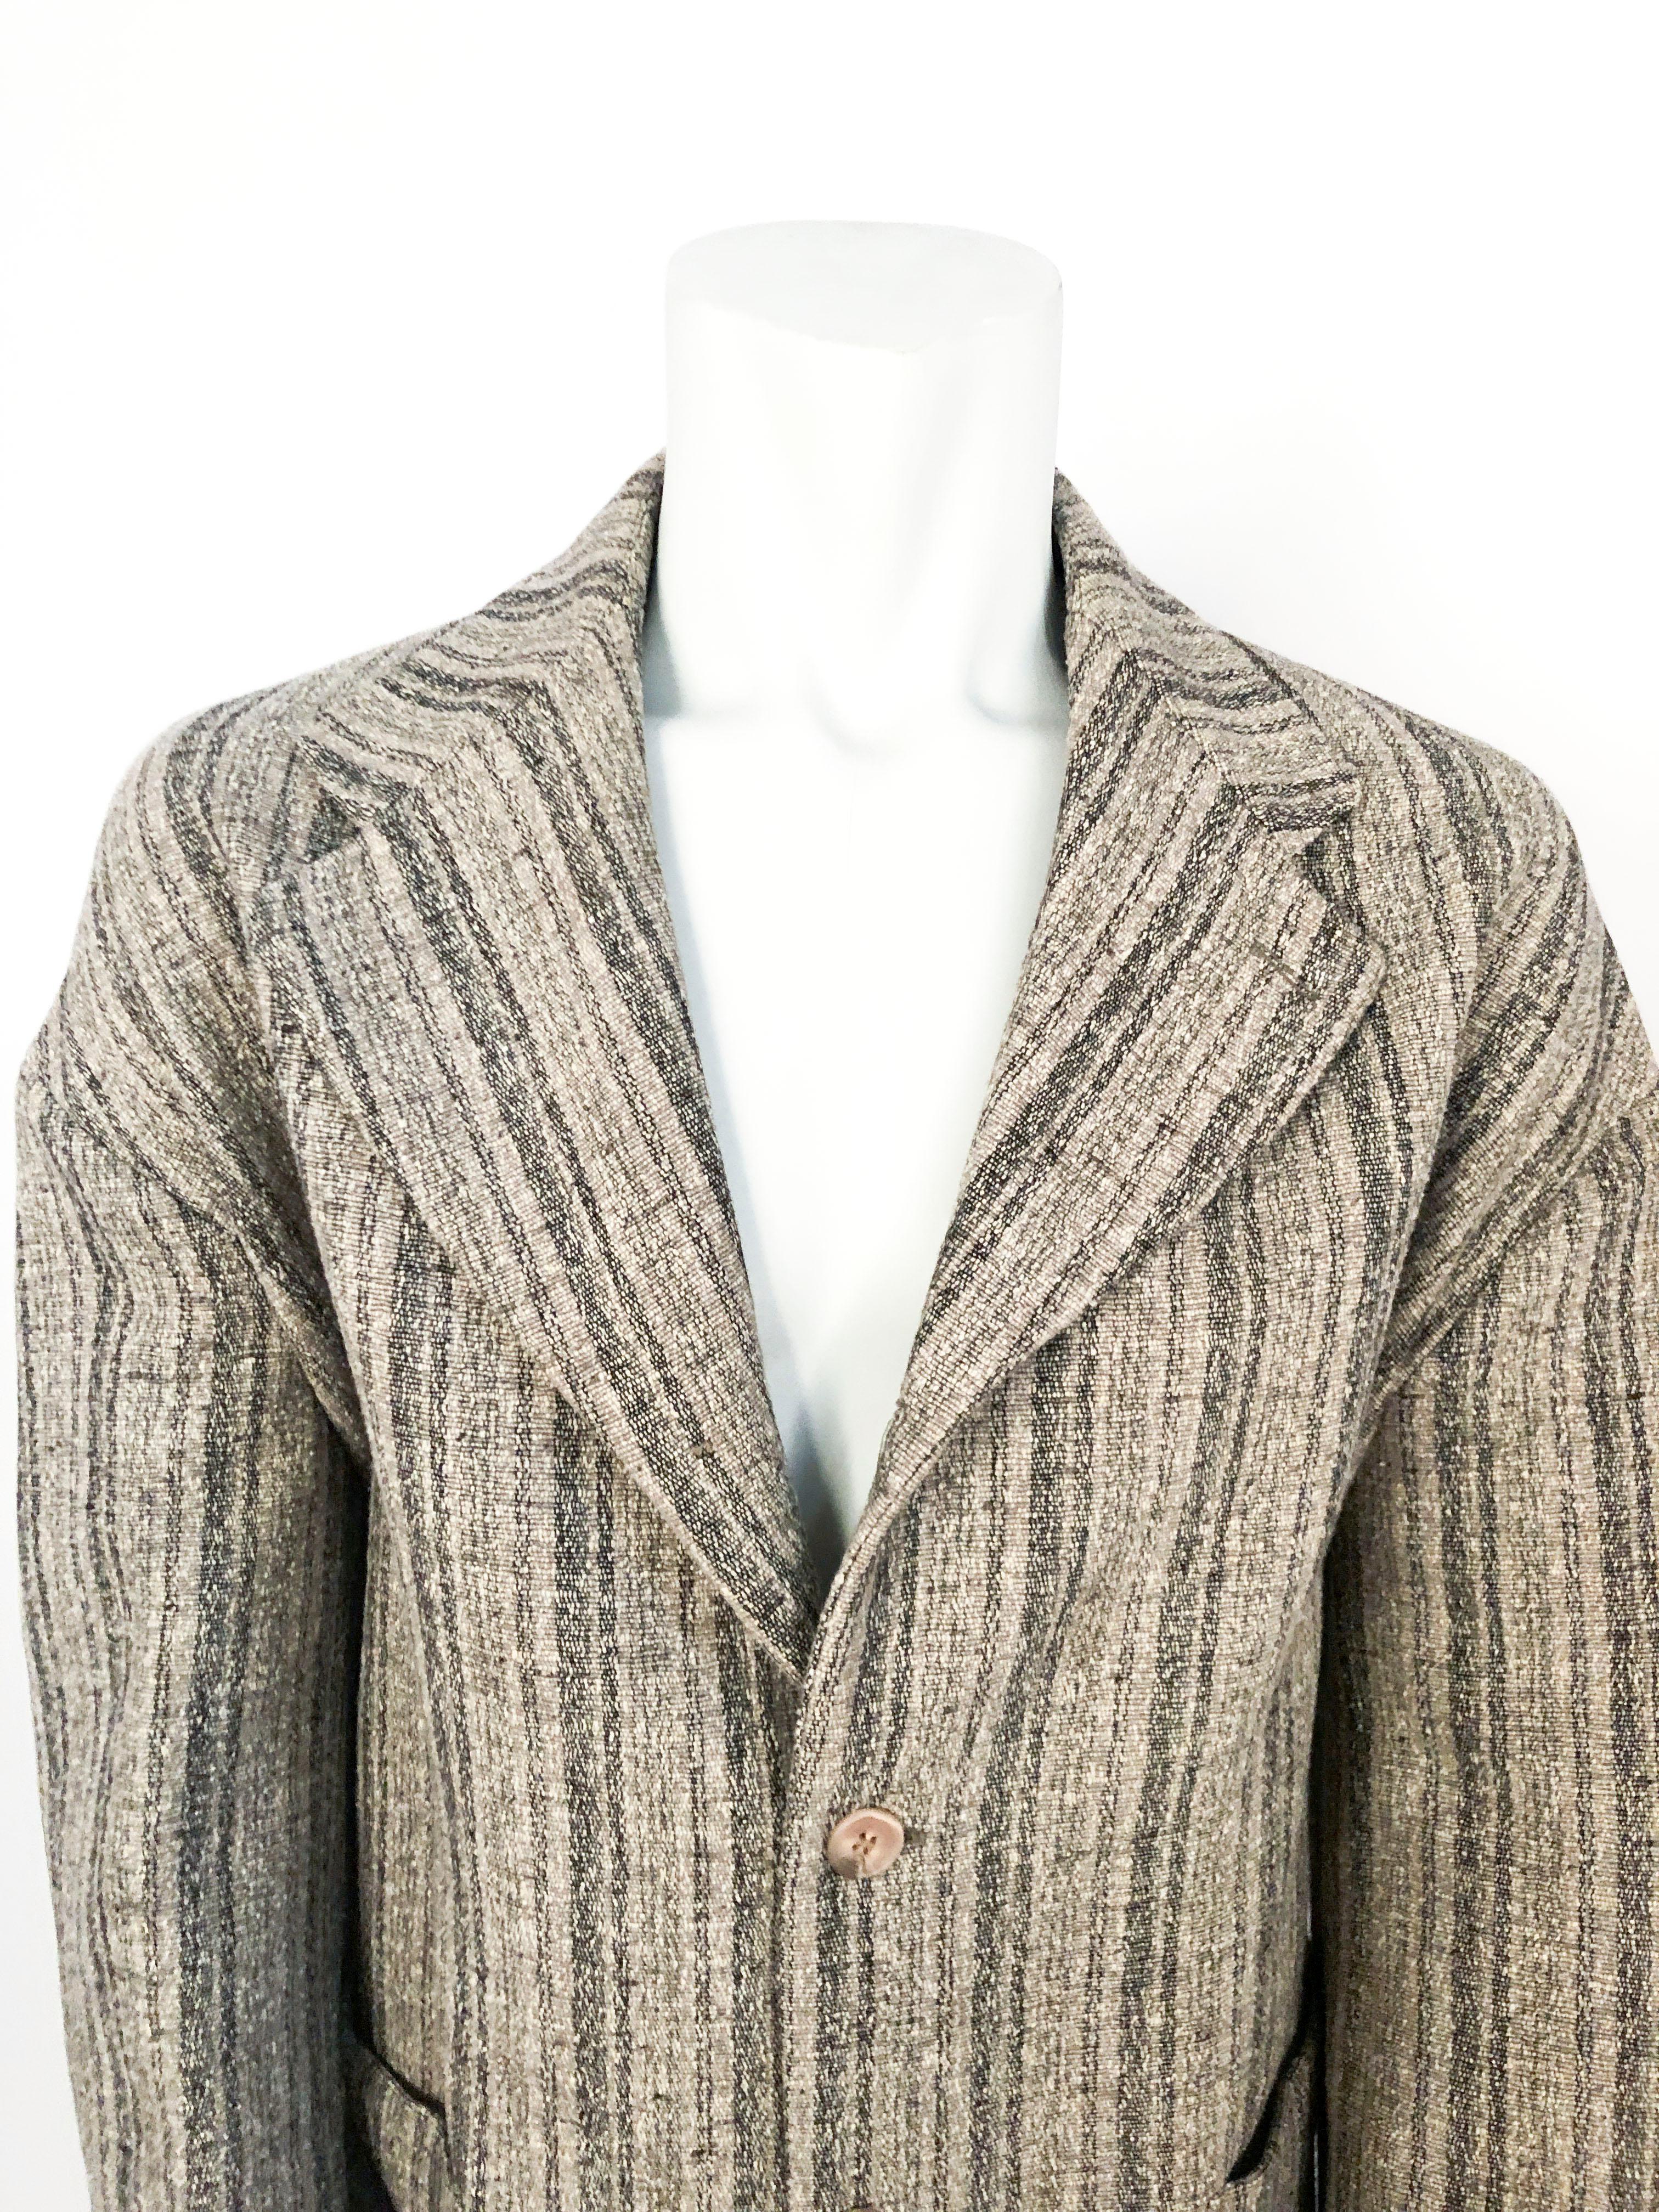 1990s Dolce and Gabbana grey tweed jacket with vertical striped pattern, large patch bucket pockets, and brown suede elbow patches. This piece is meant to be worn oversized. 